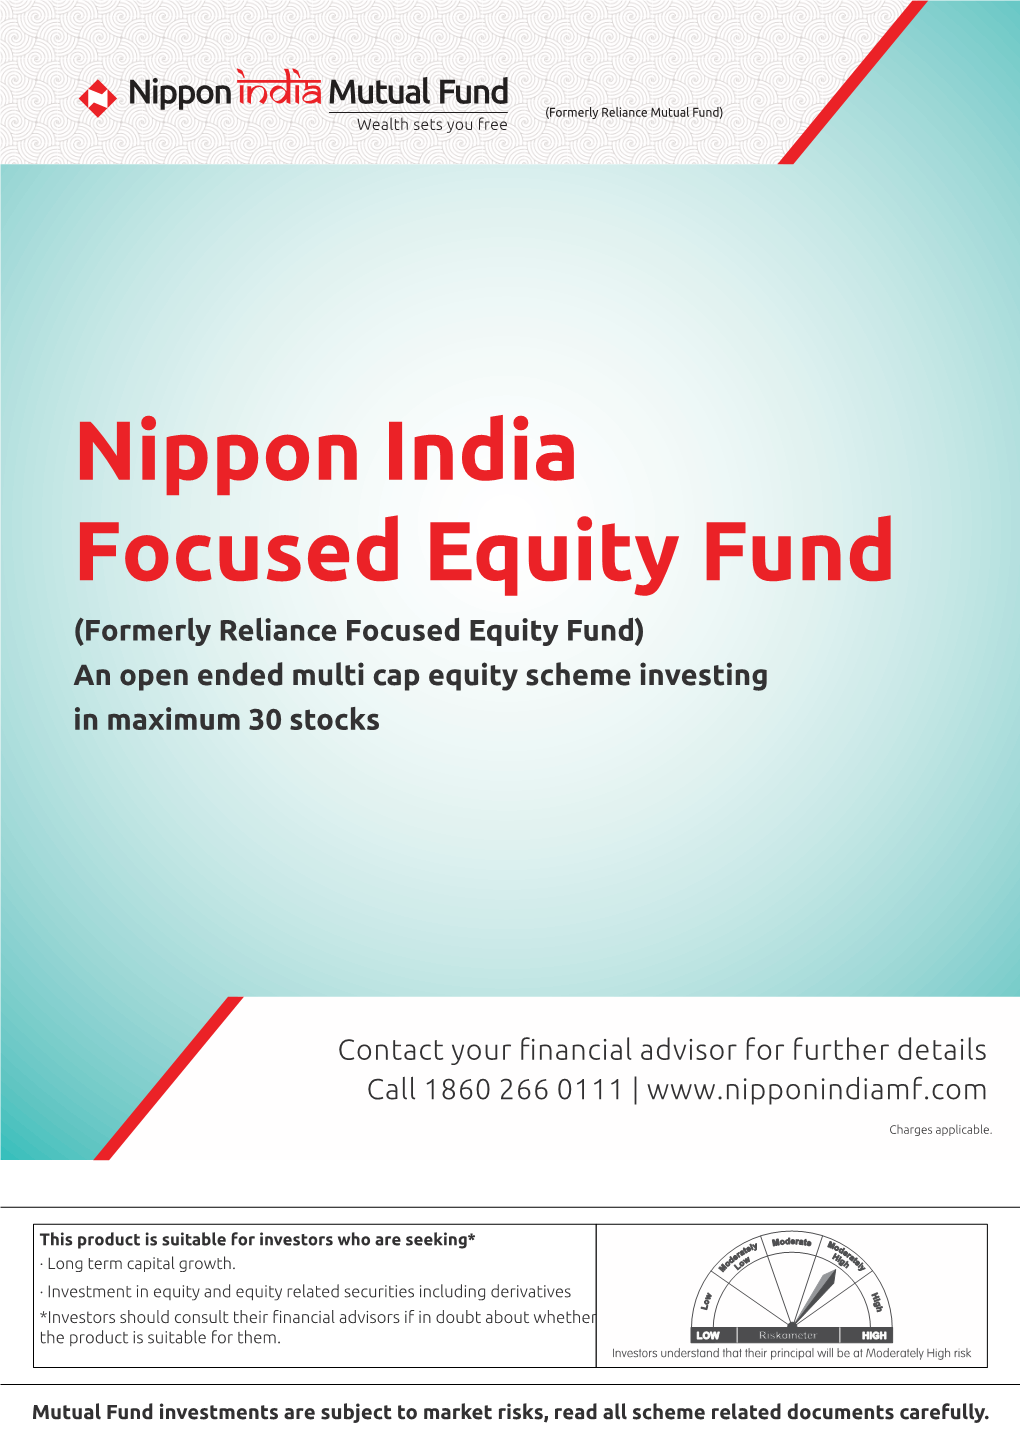 Nippon India Focused Equity Fund (Formerly Reliance Focused Equity Fund) an Open Ended Multi Cap Equity Scheme Investing in Maximum 30 Stocks